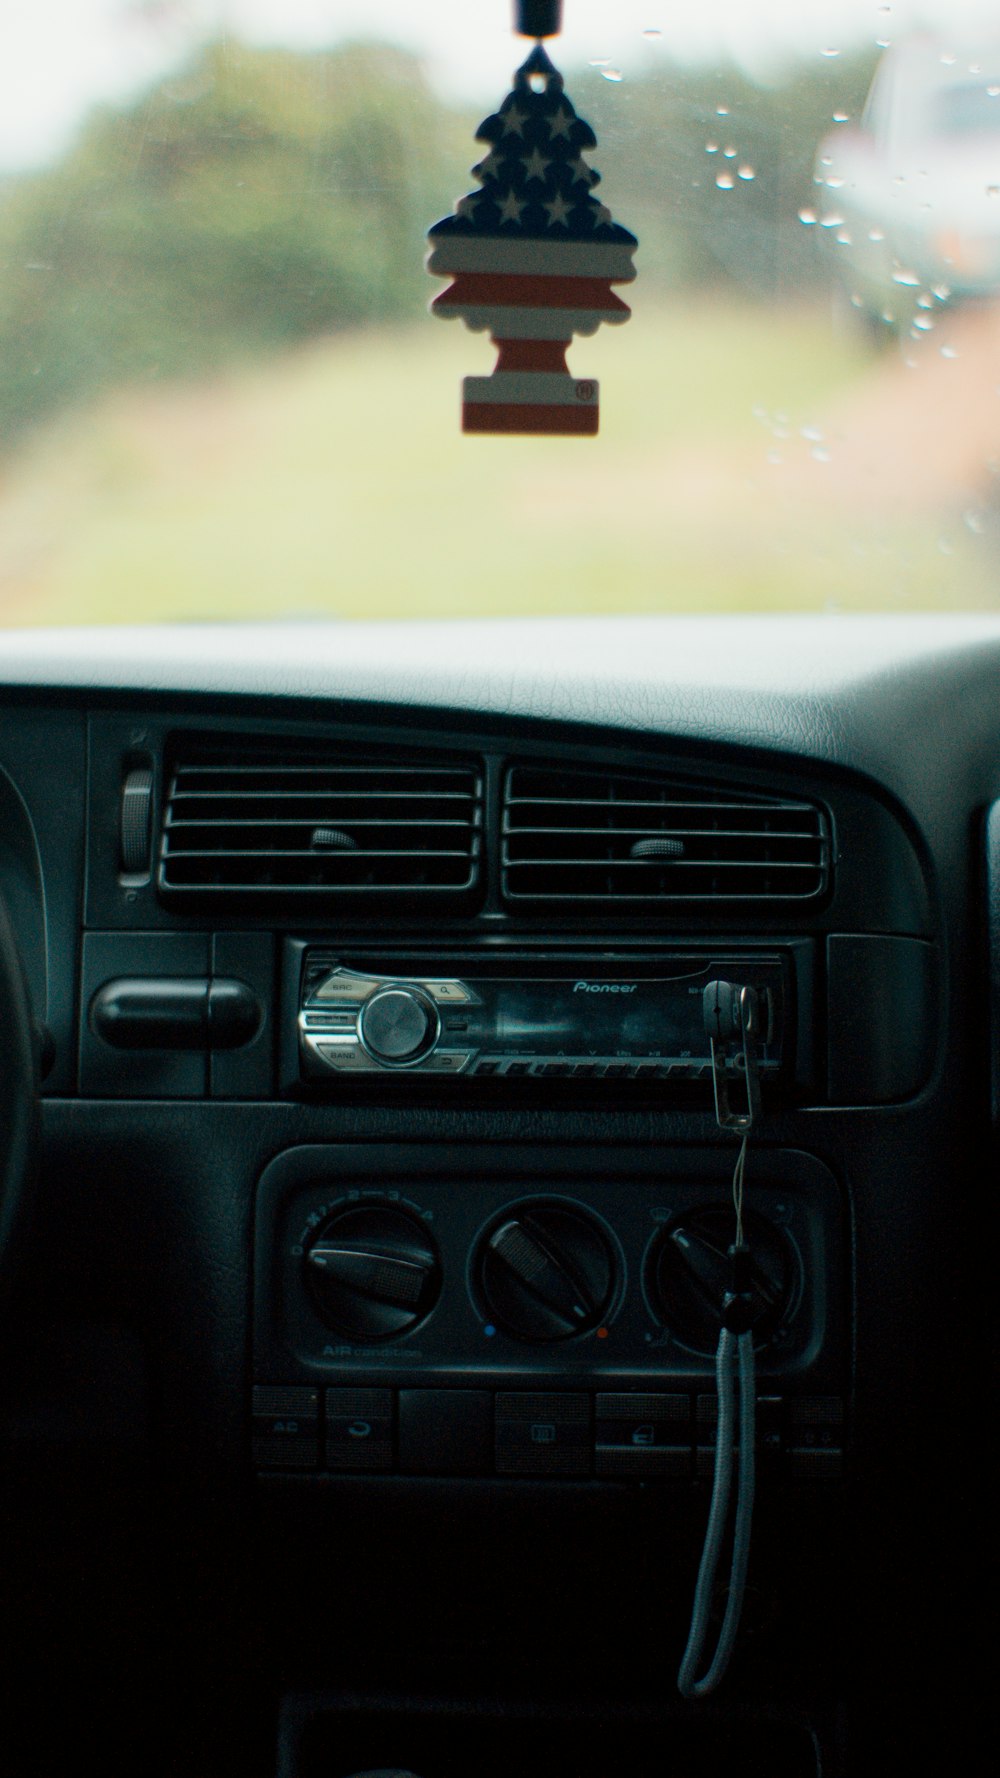 a car dashboard with an american flag decoration hanging from the dash